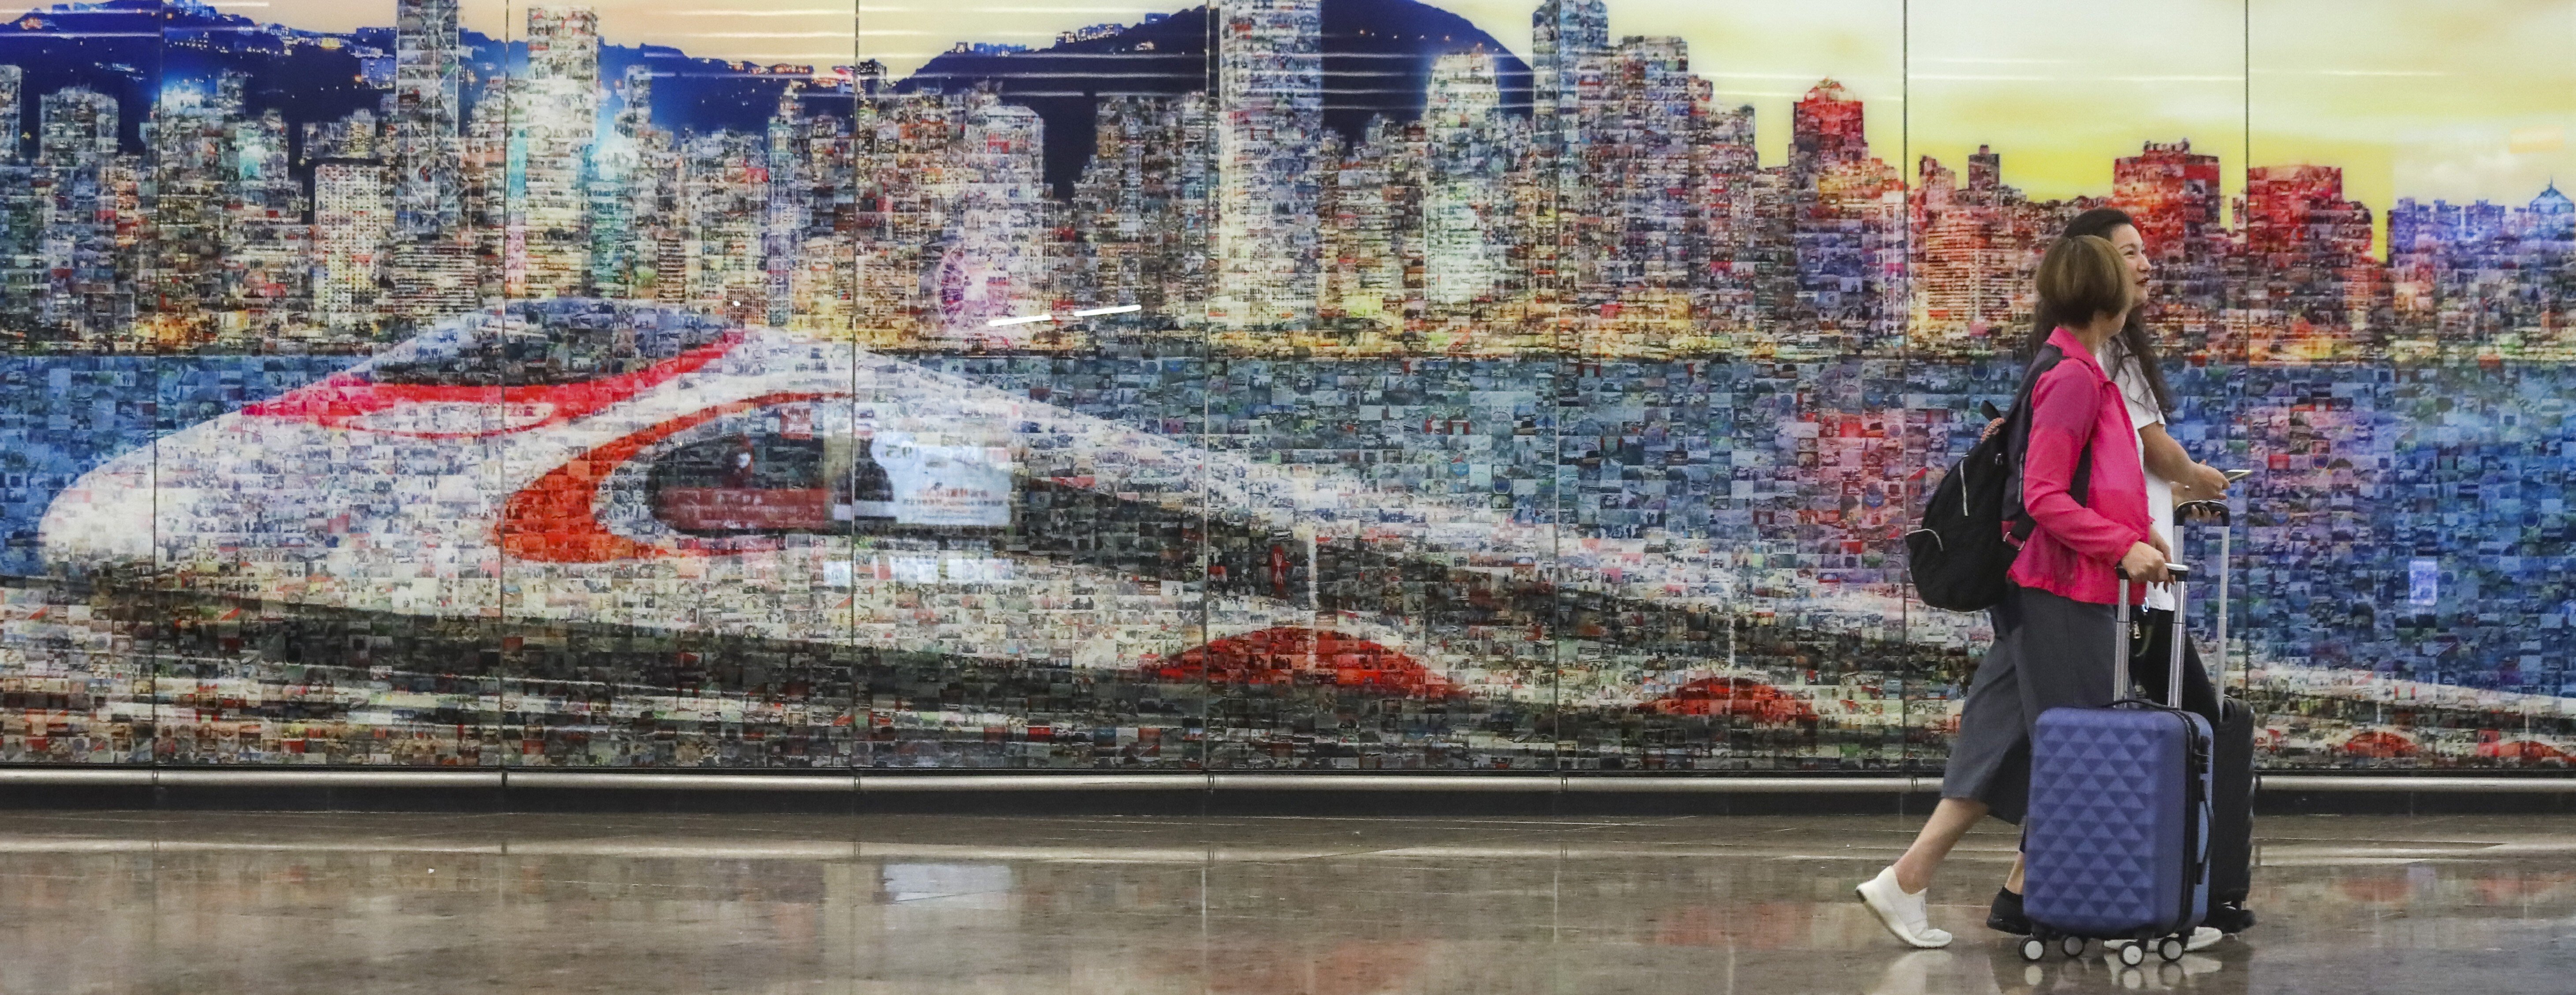 A station wall design showing a high-speed rail link train. Photo: K. Y. Cheng